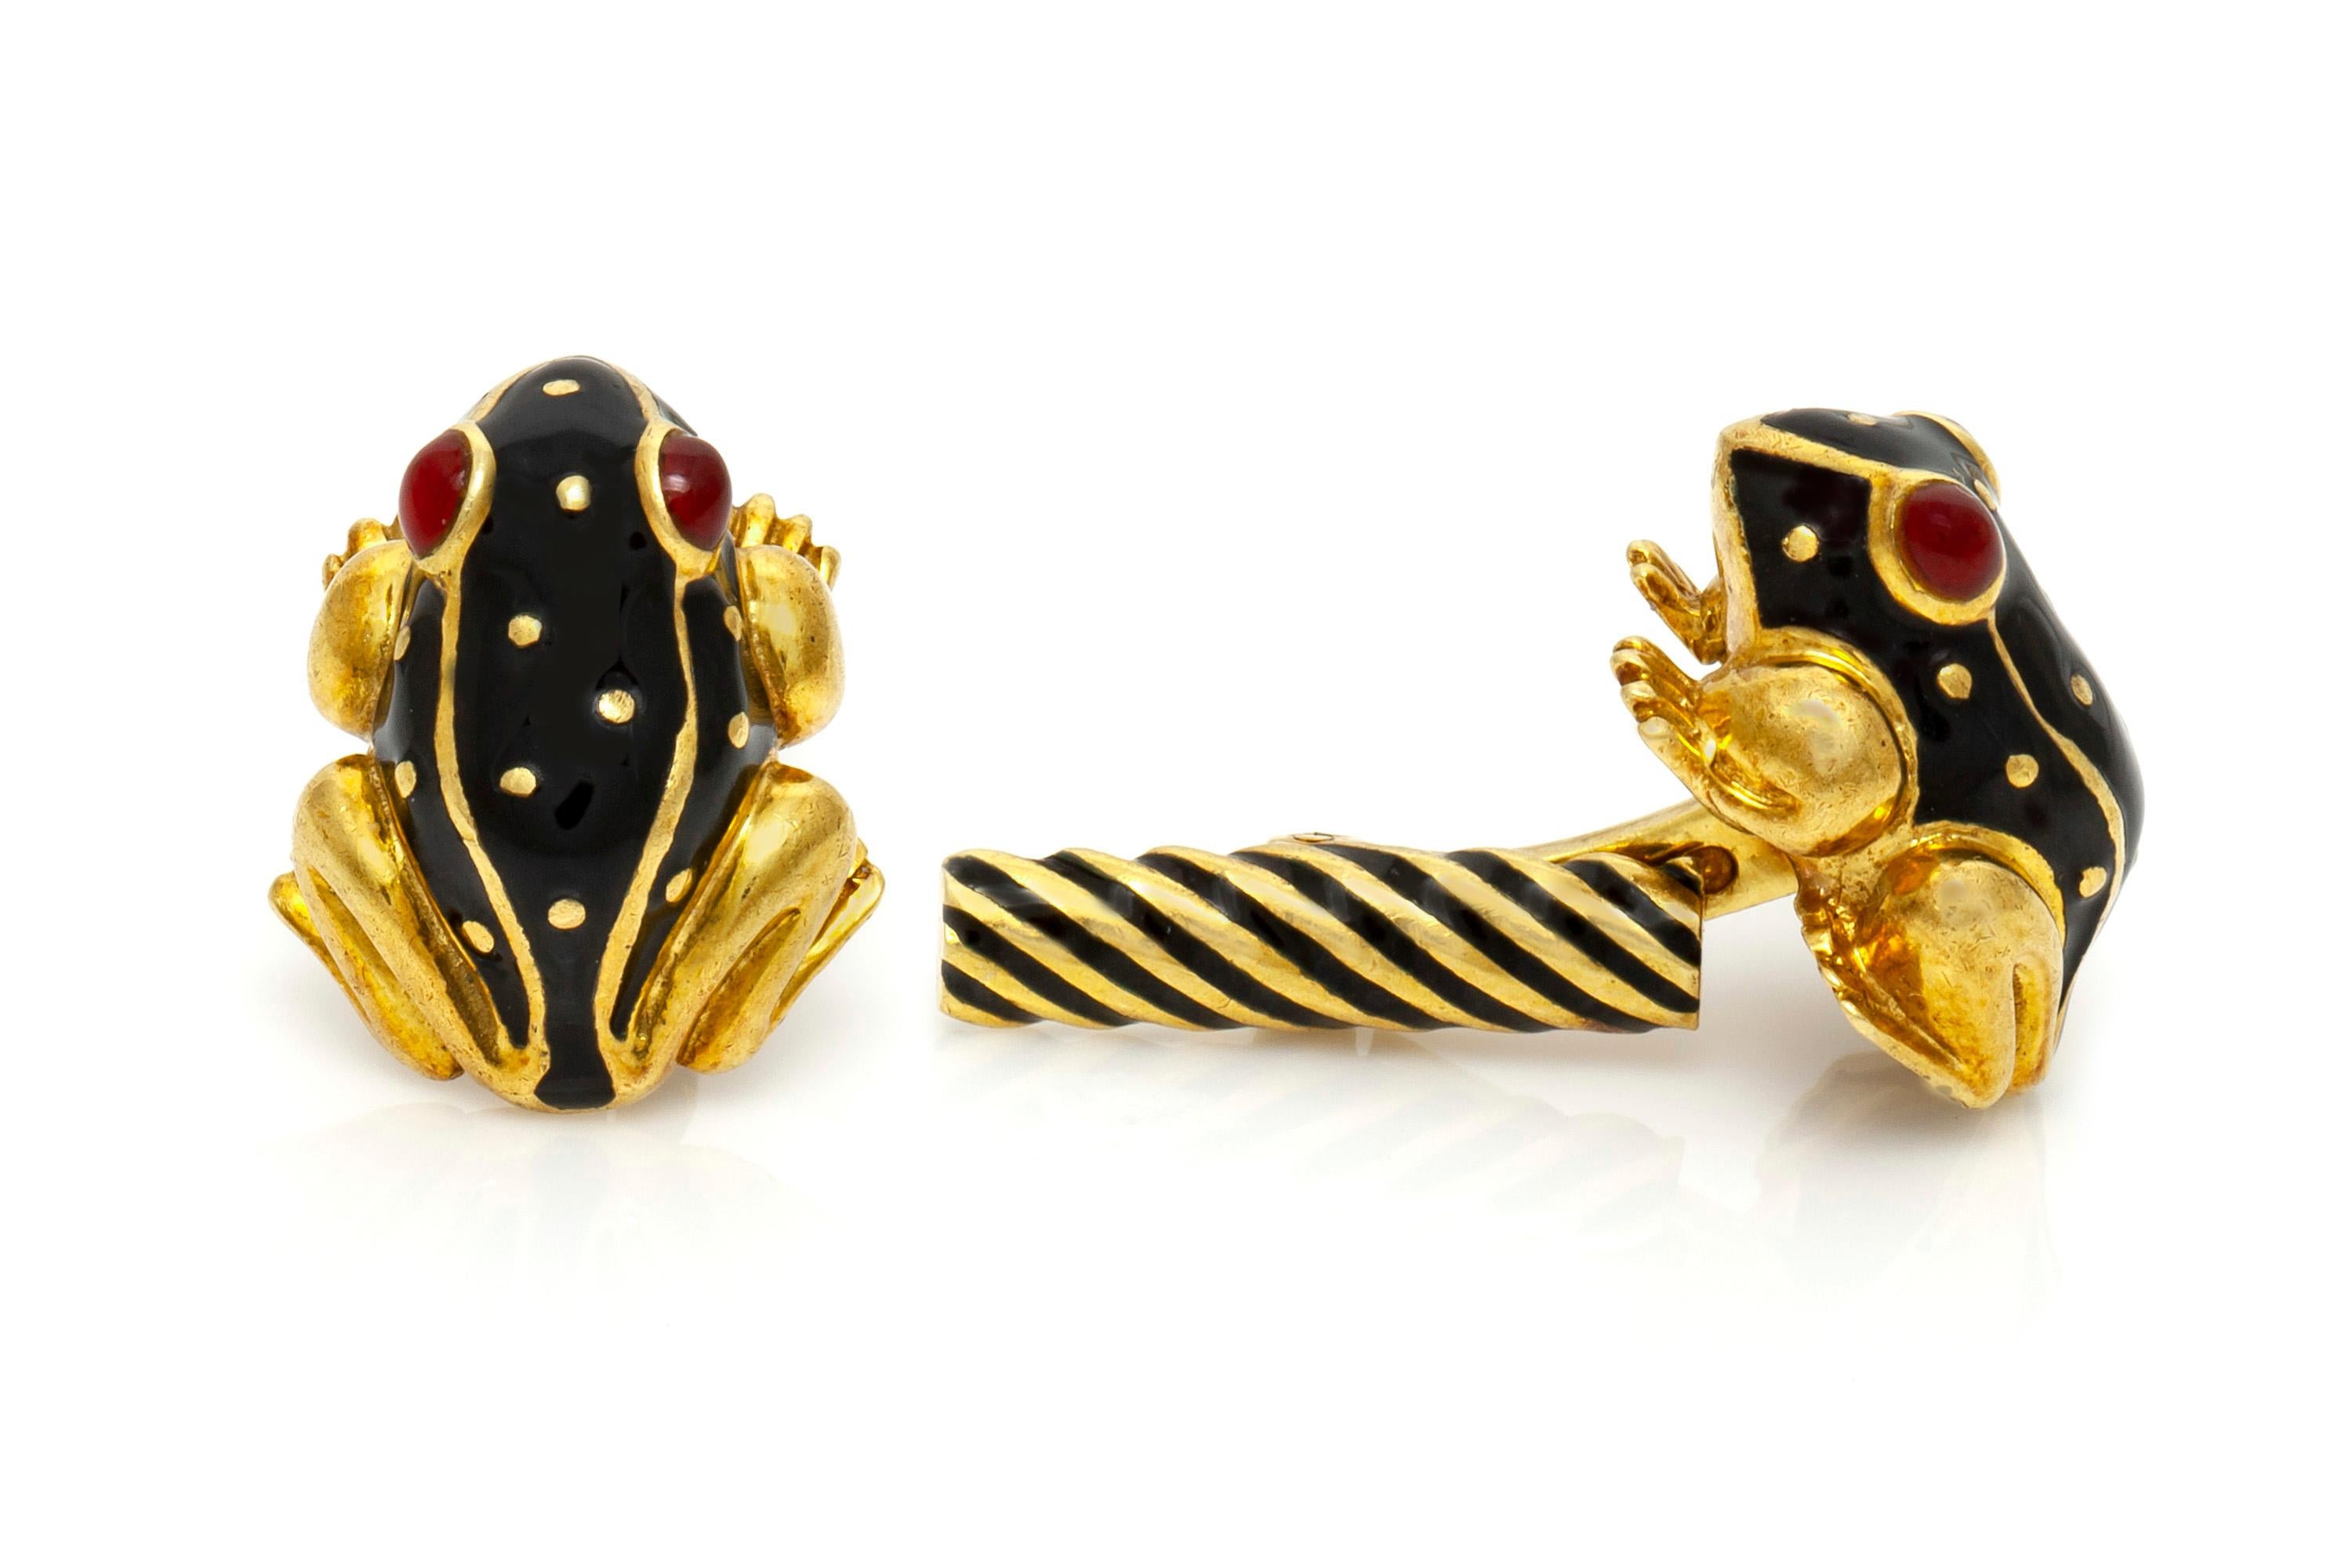 David webb cufflinks decorated with multicolor enamel, finely crufted in 18k.
Weighing 12.3 DWT
